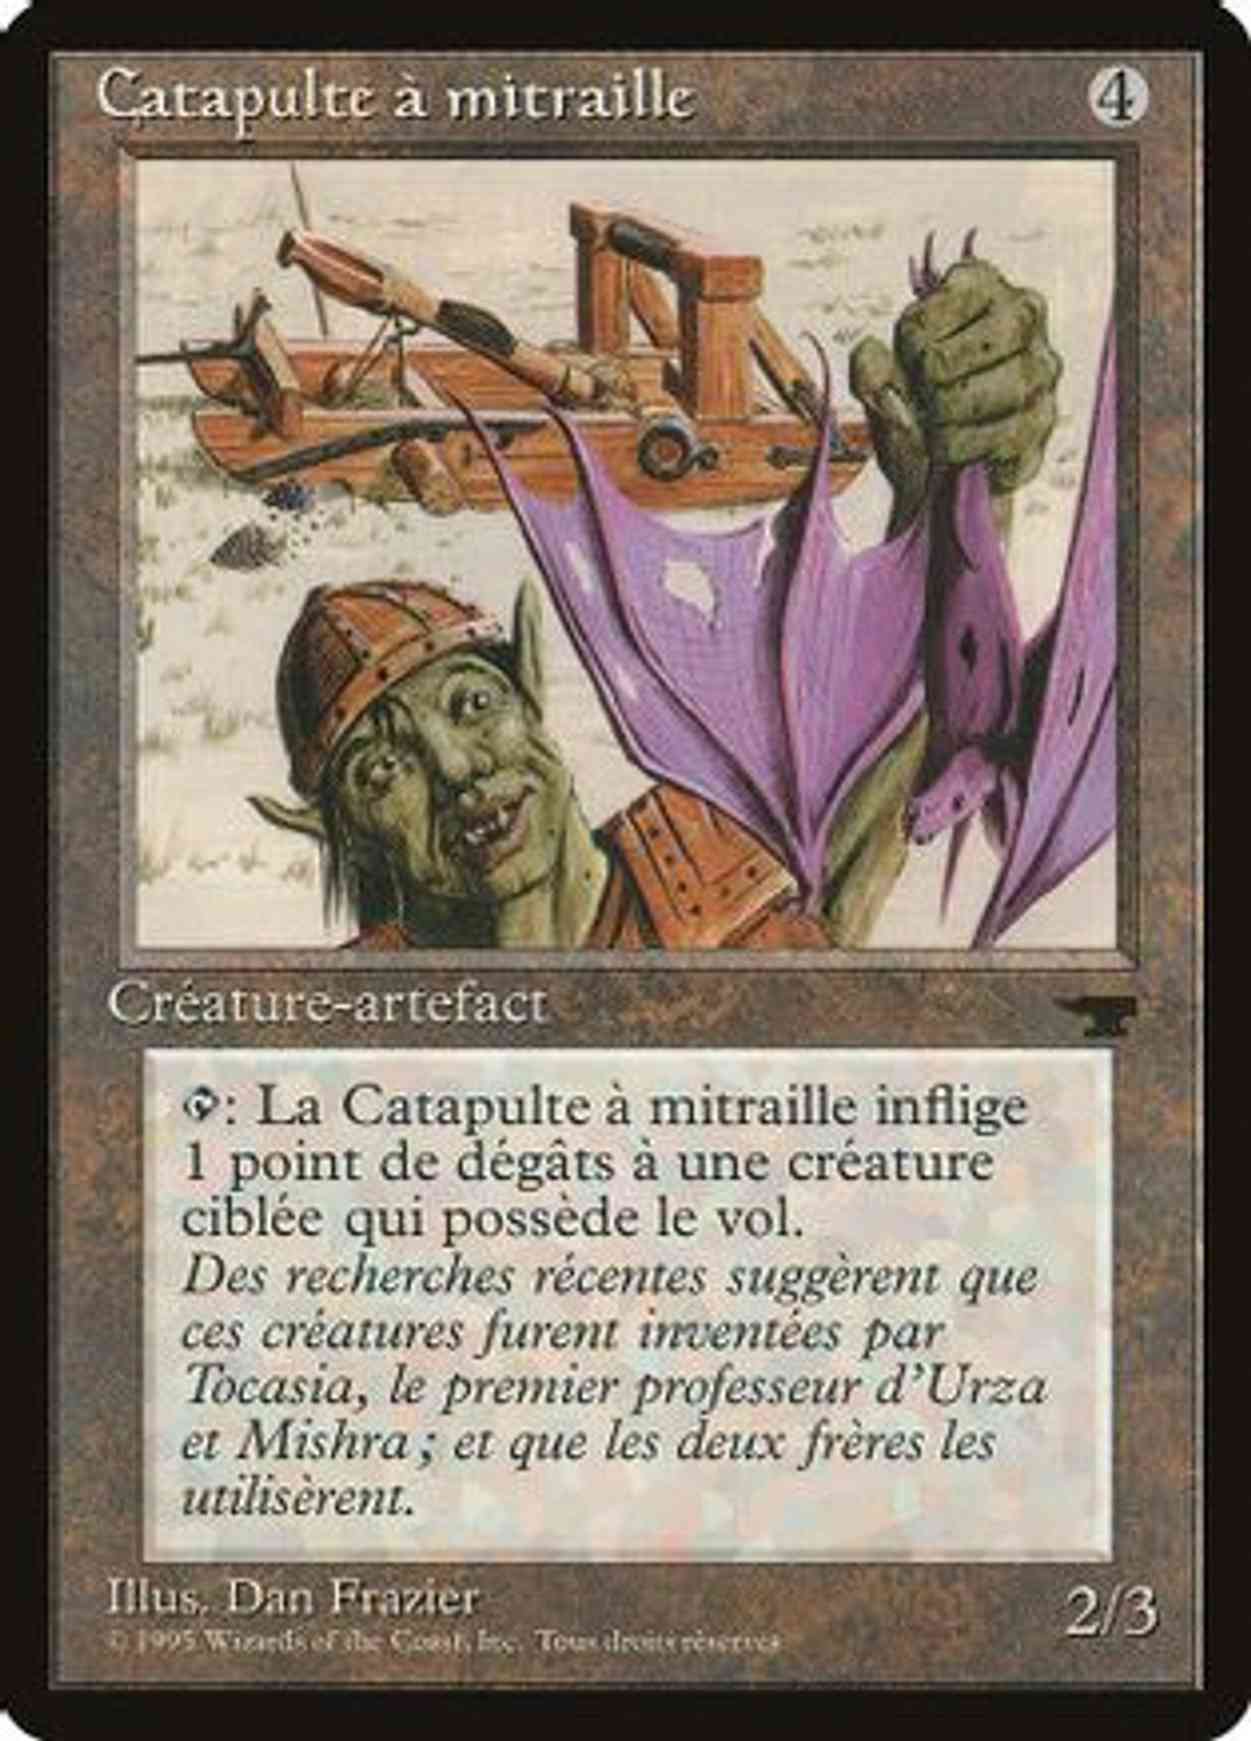 Grapeshot Catapult (French) - "Catapulte a mitraille" magic card front